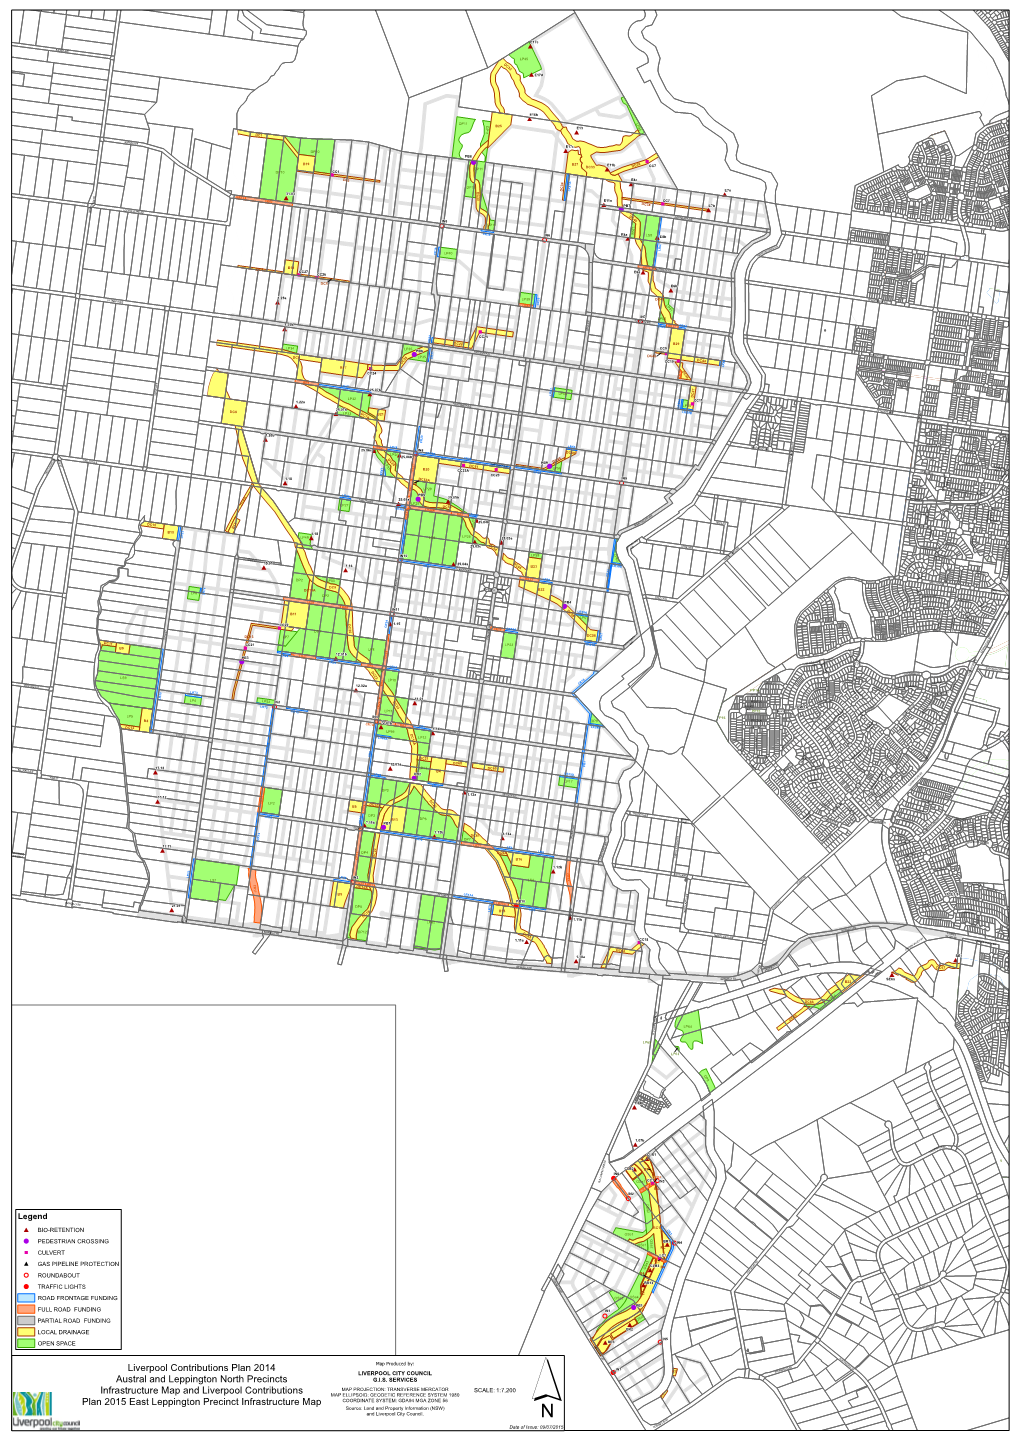 Liverpool Contributions Plan 2014 Austral and Leppington North Precincts Infrastructure Map and Liverpool Contributions Plan